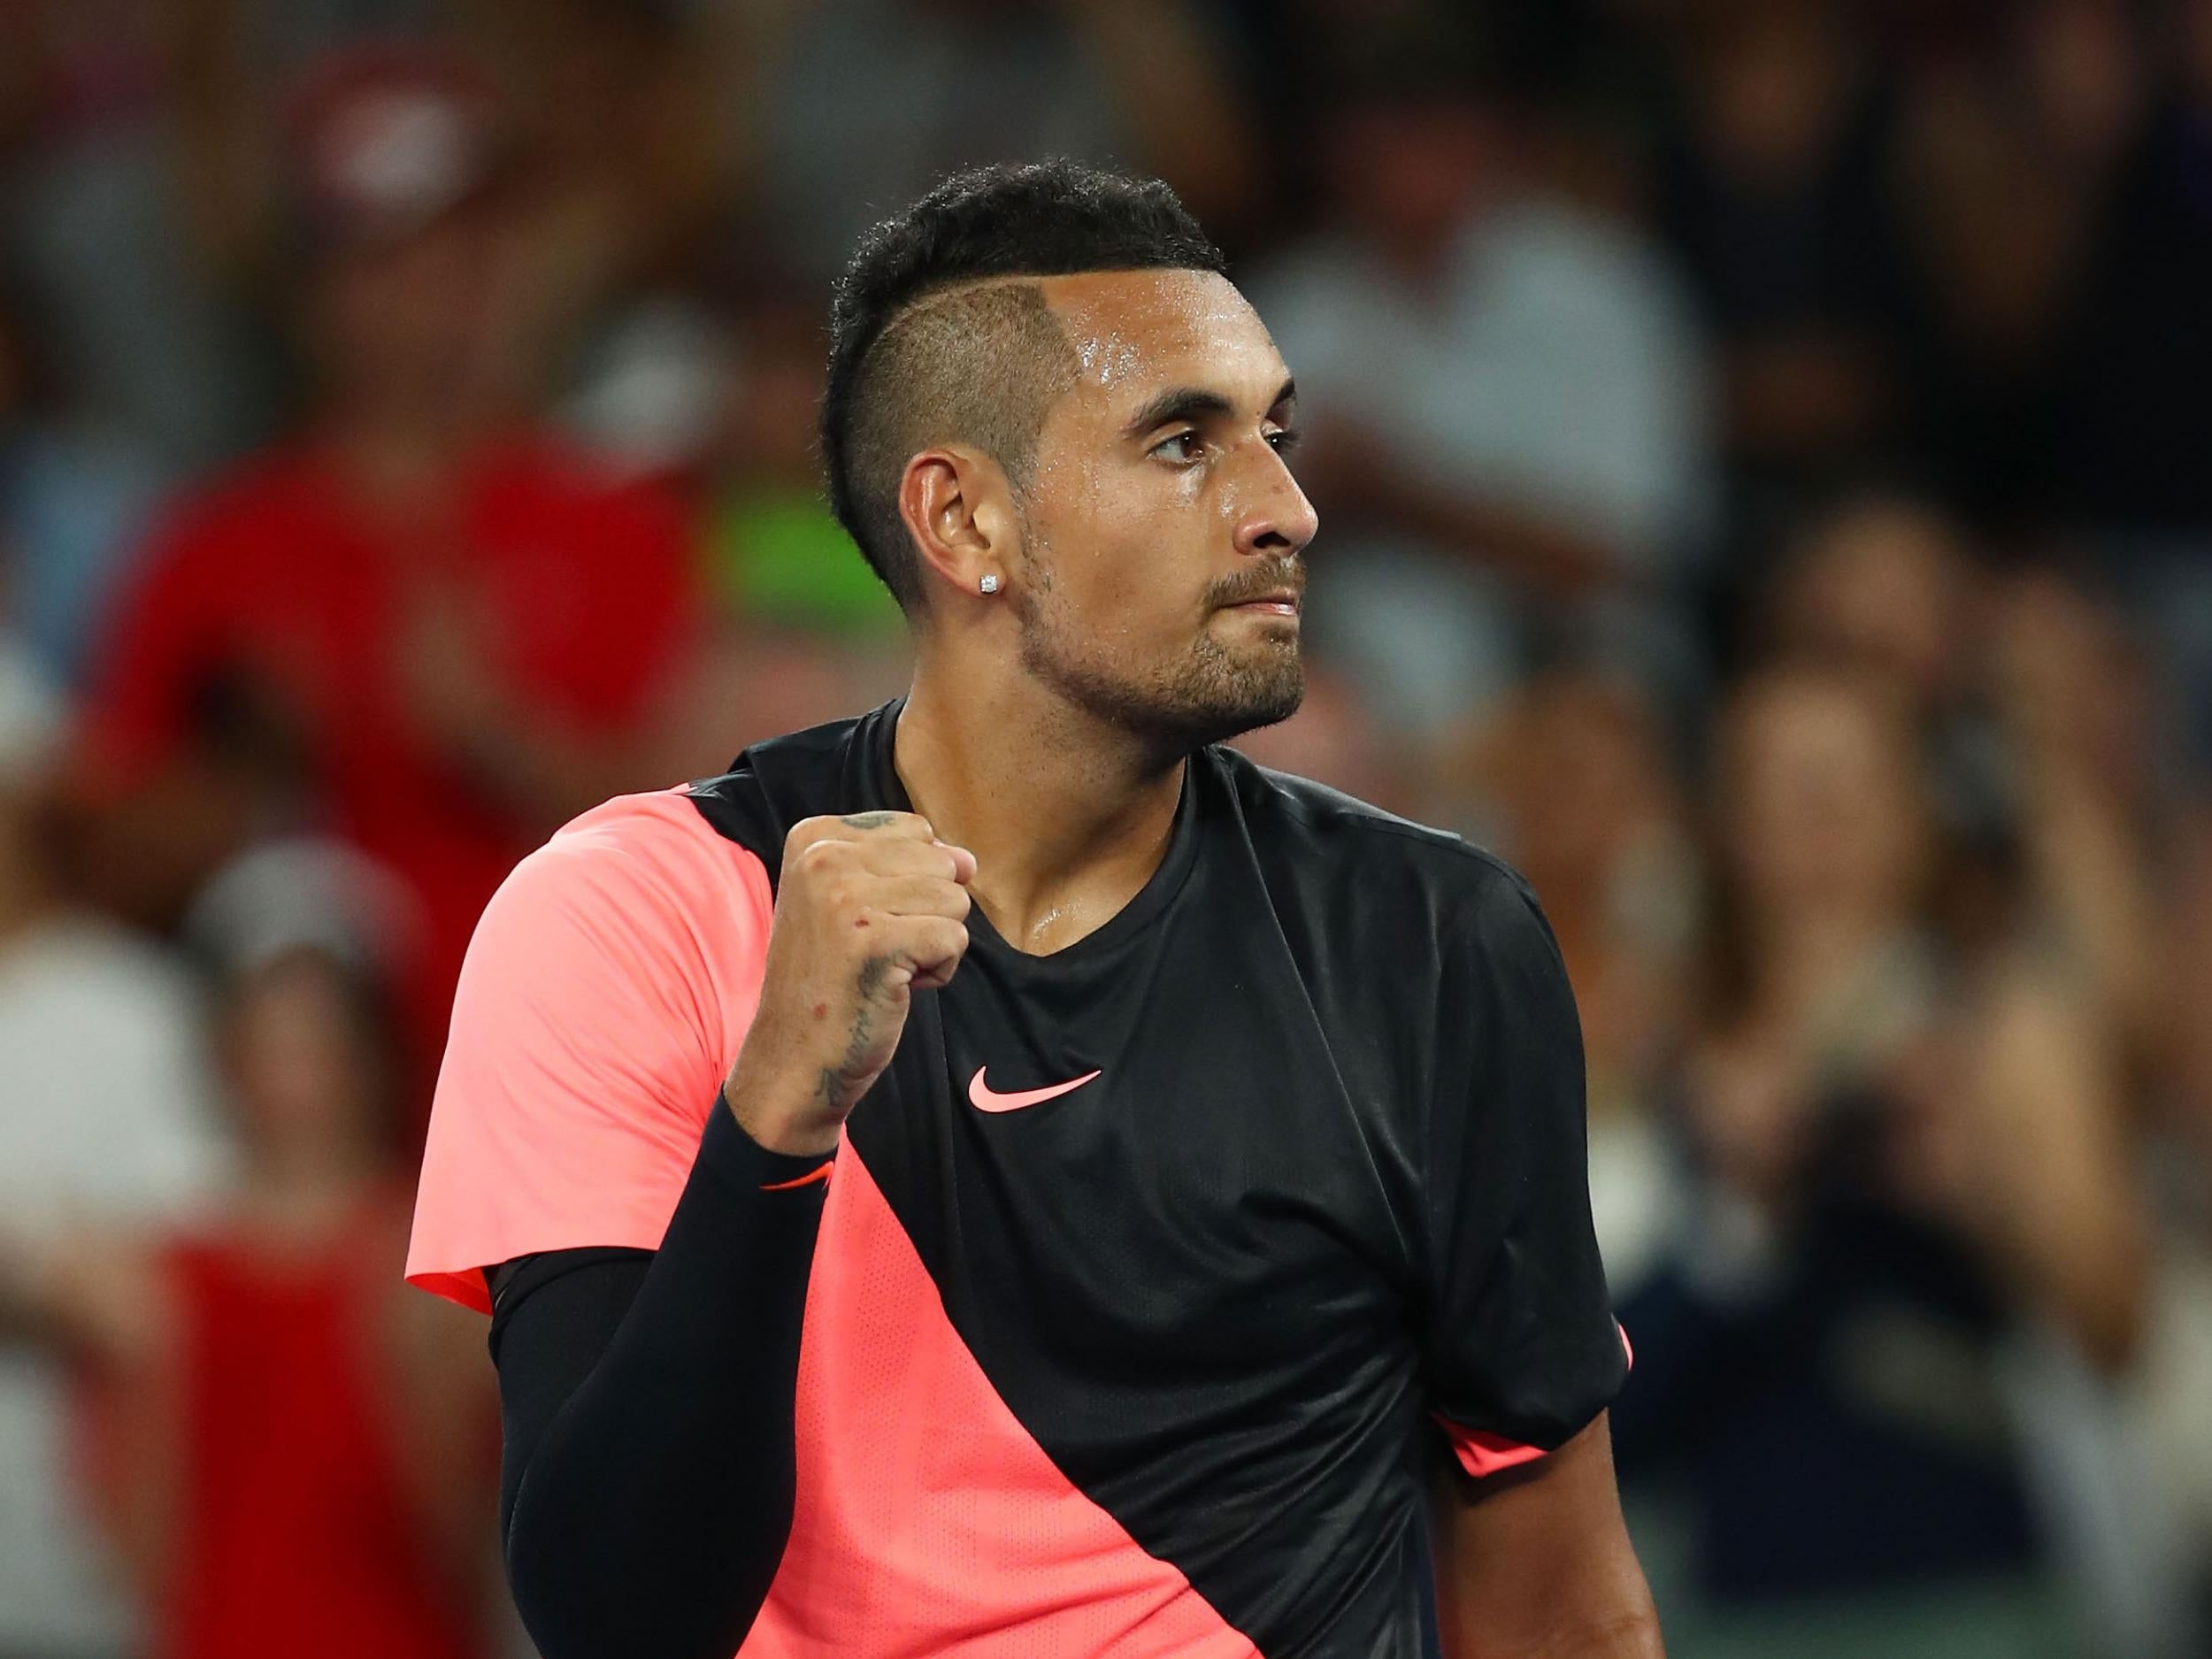 Kyrgios will face Tsonga in the third round